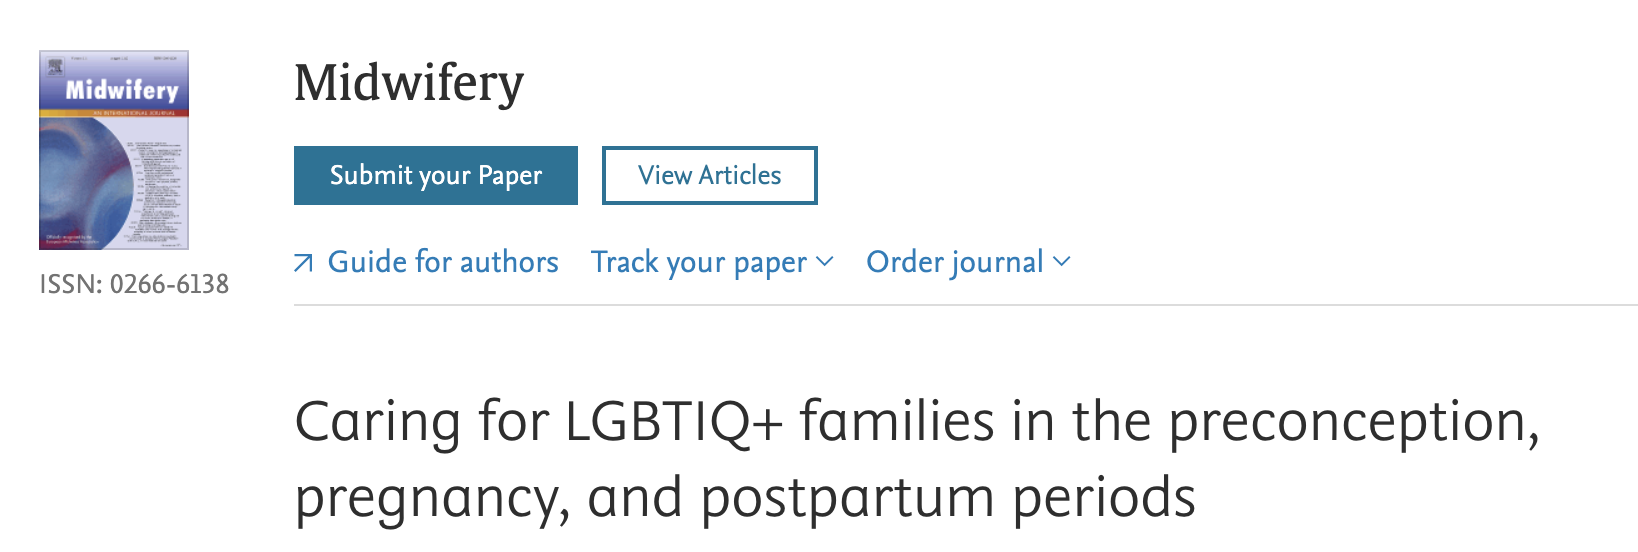 Call for paper: Midwifery – Caring for LGBTIQ+ families in the preconception, pregnancy, and postpartum periods